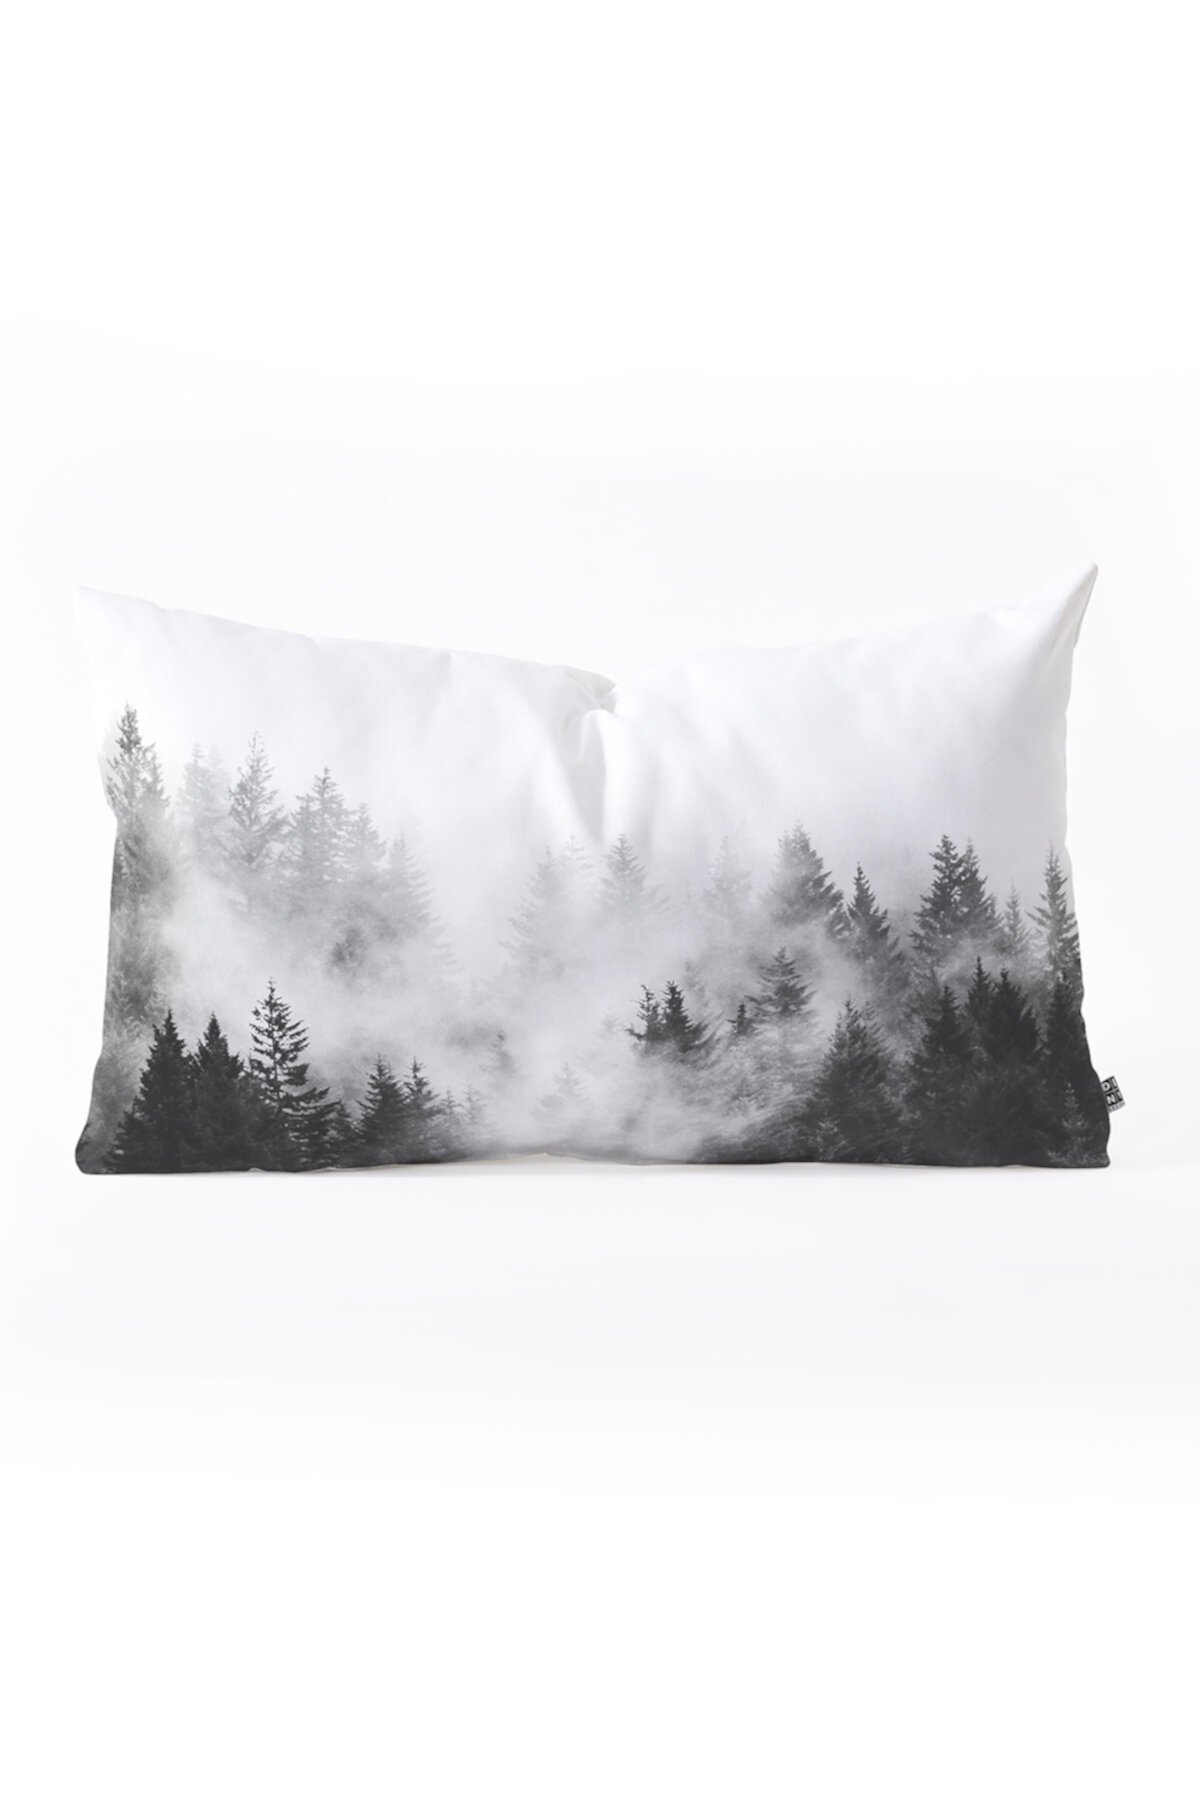 Nature Magick Foggy Trees Black and White Oblong Throw Pillow Deny Designs